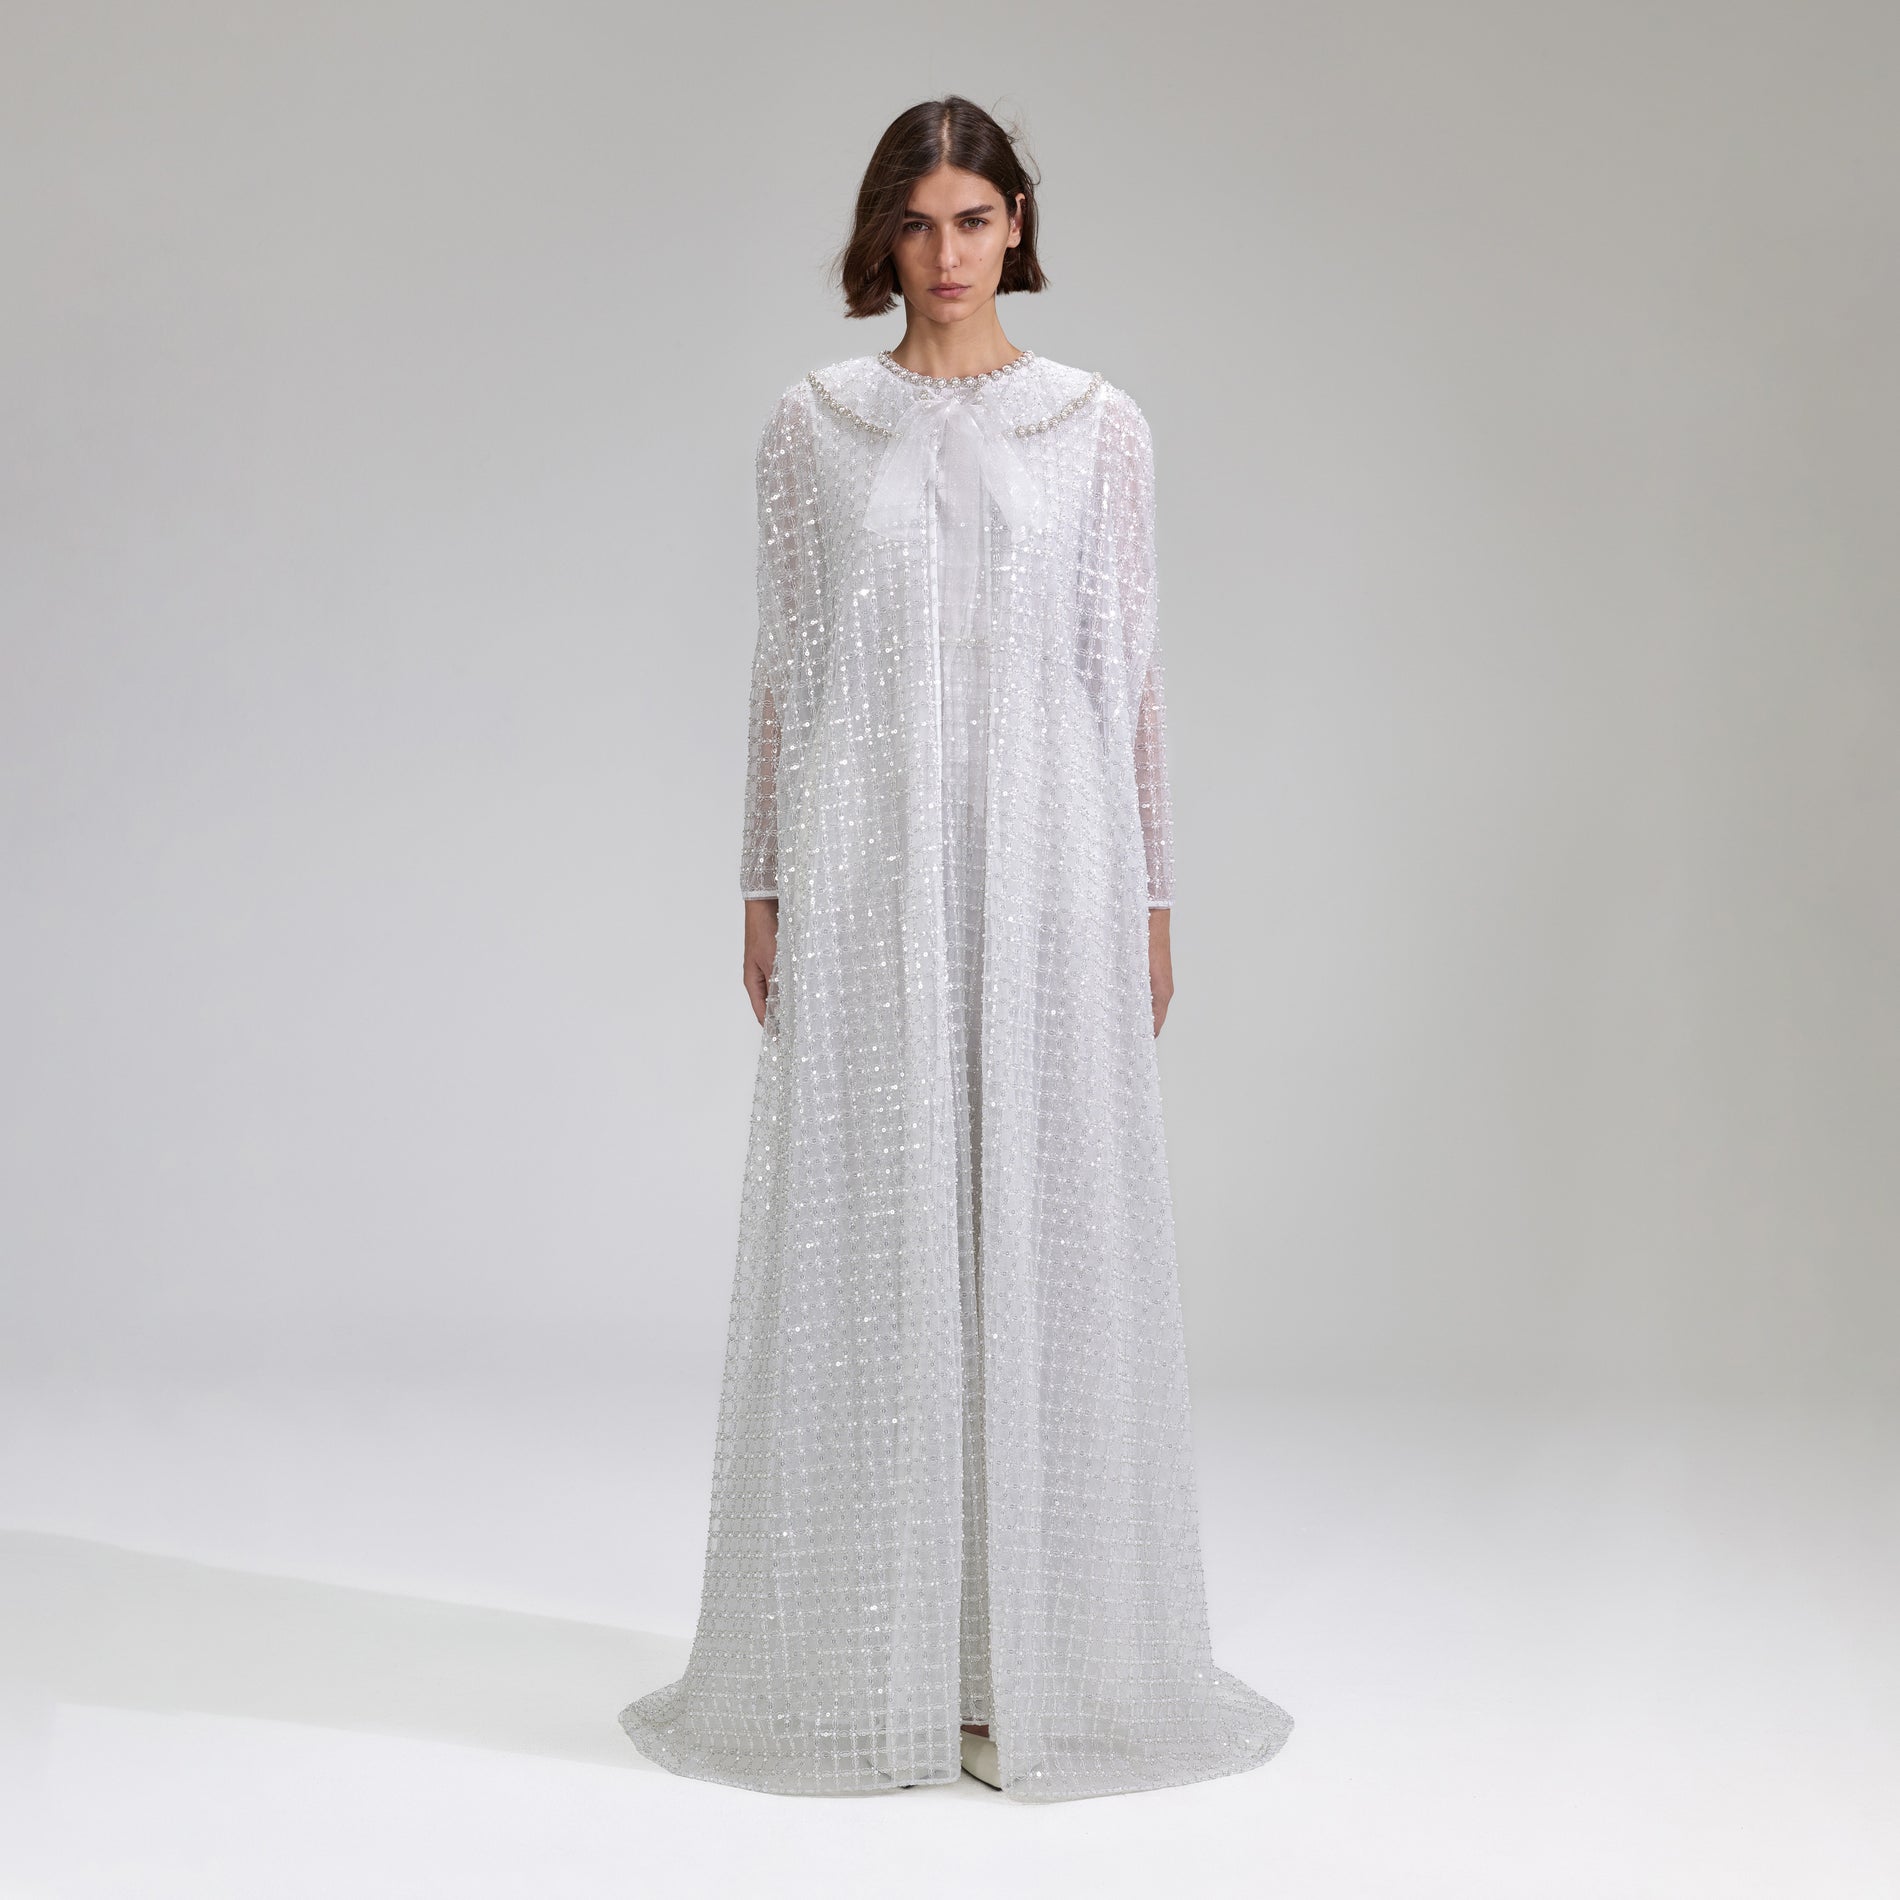 A woman wearing the White Grid Sequin Maxi Cape